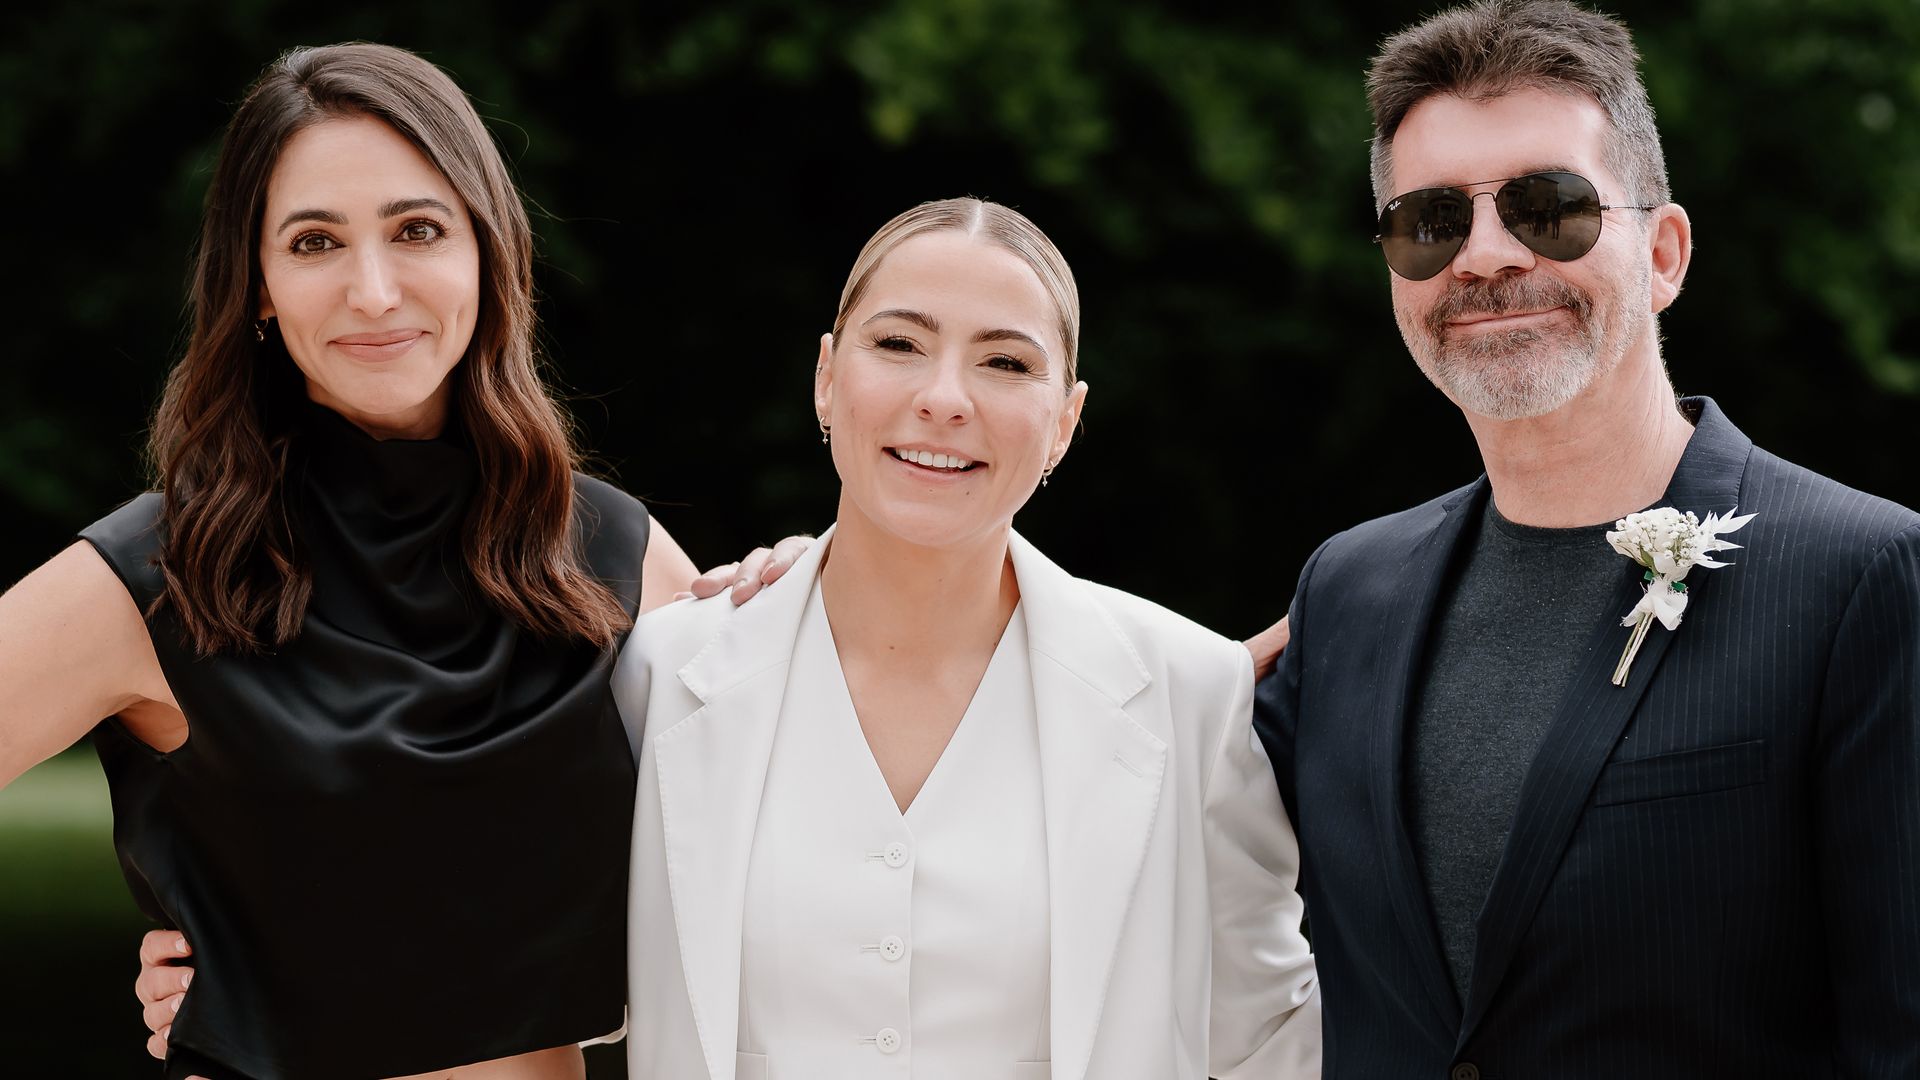 Lucy Spraggan in a white suit with Lauren Silverman and Simon Cowell in black